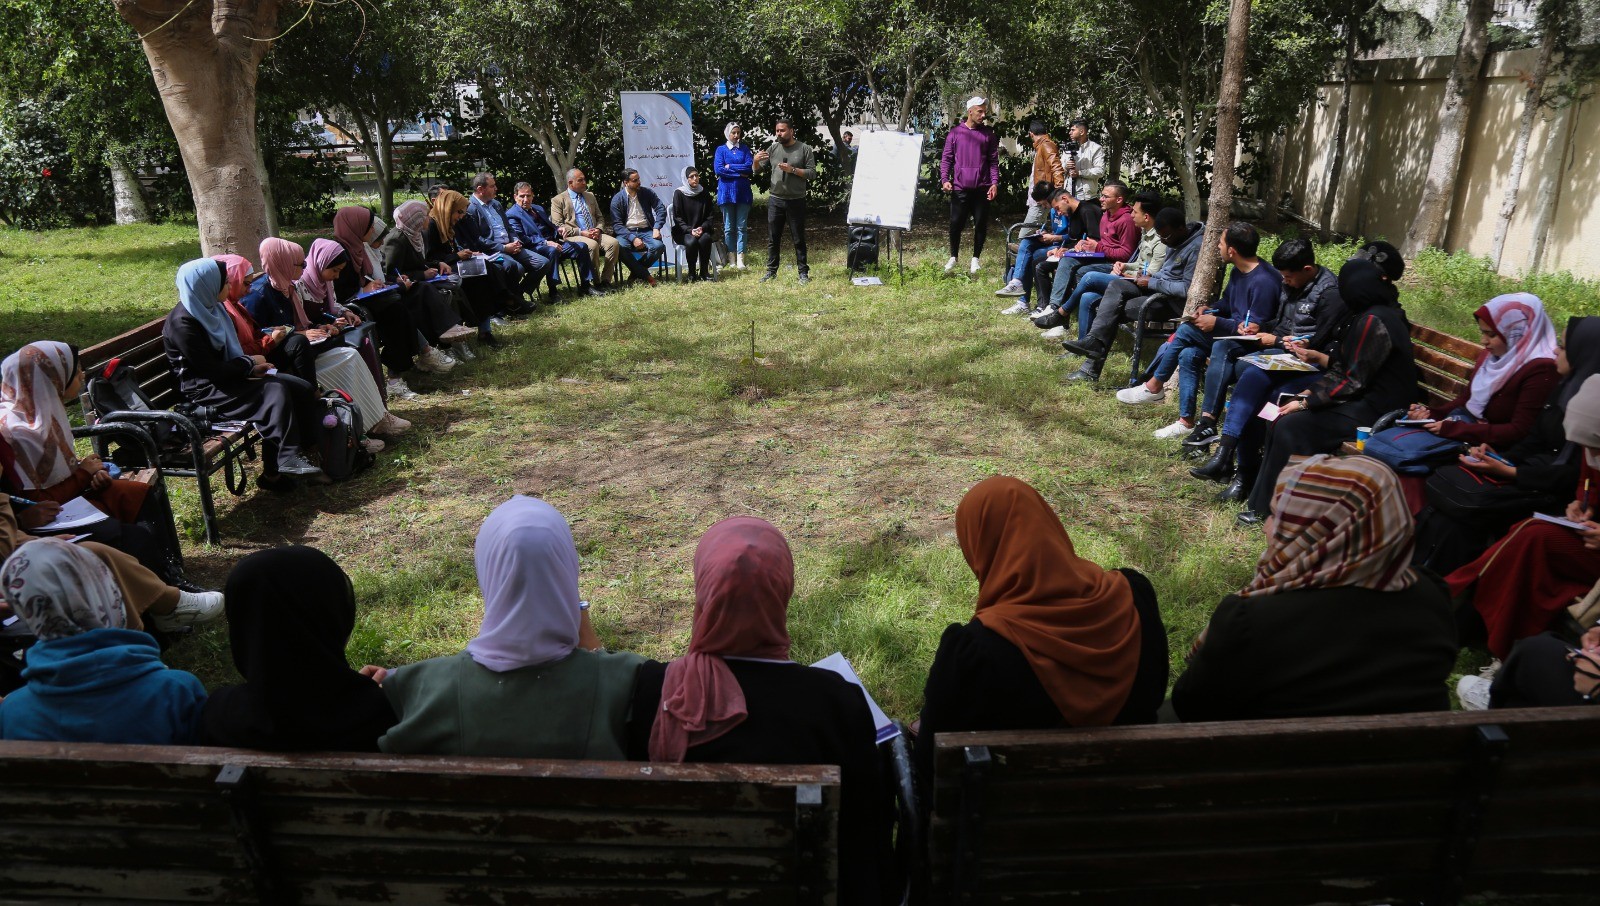 Sponsored by Press House: Gaza University implements the "First Student Rights Media Camp" initiative